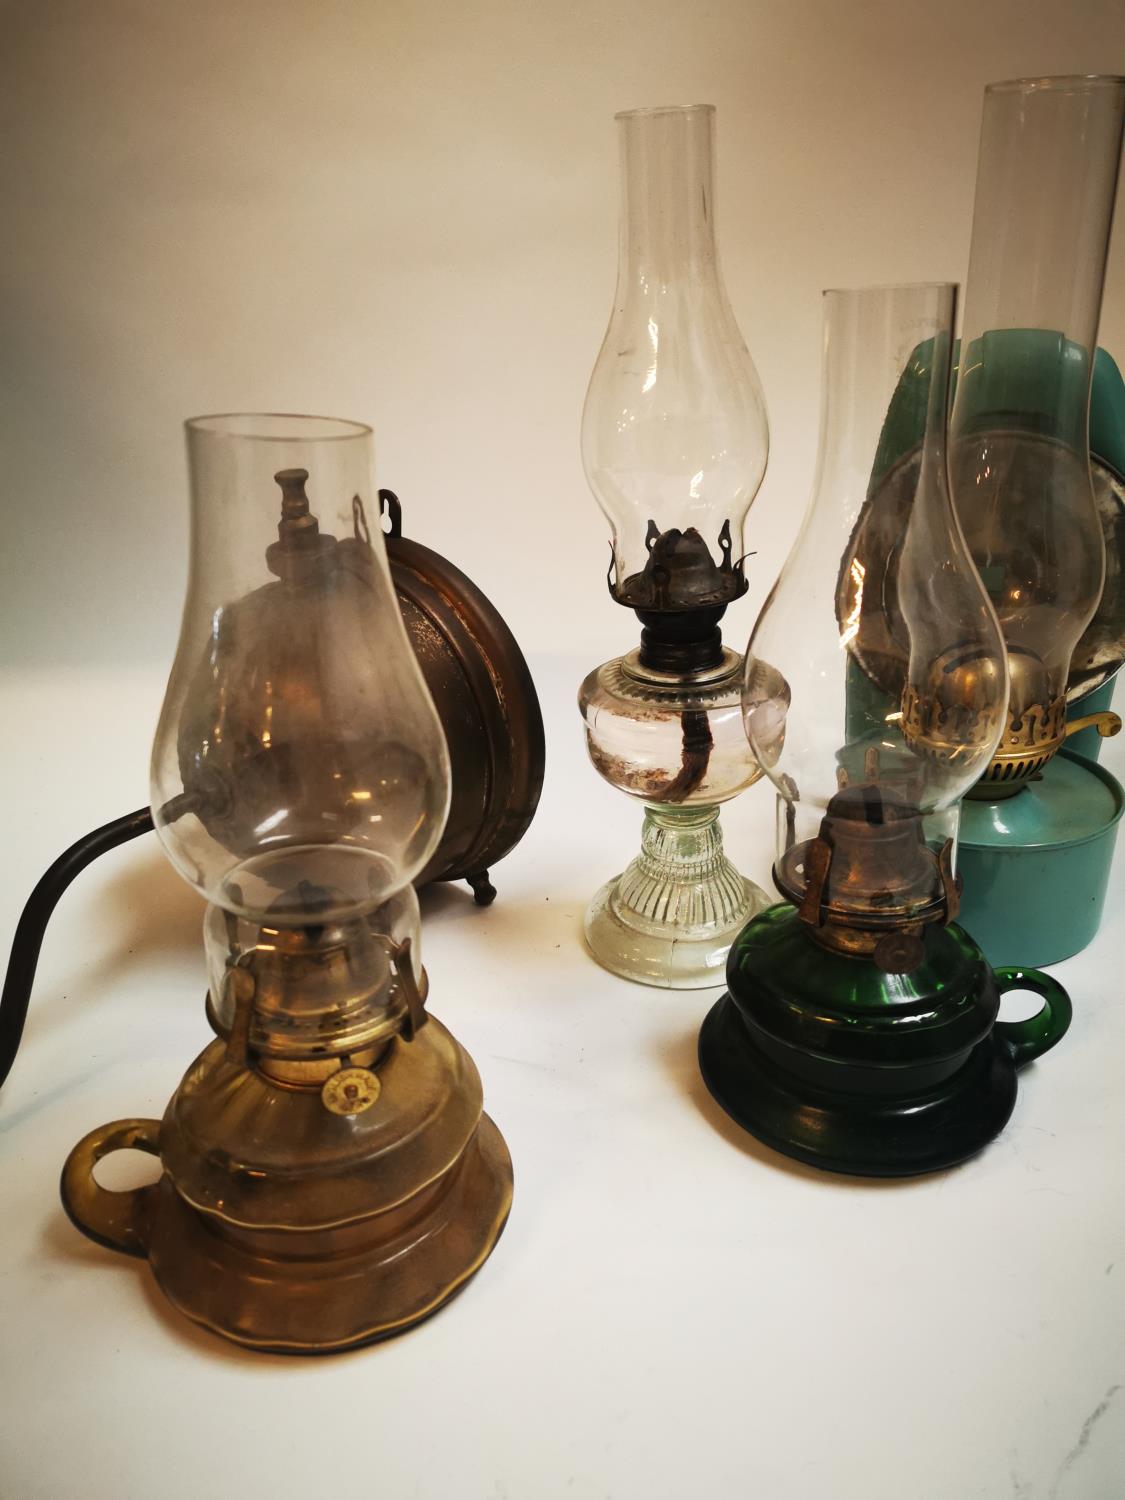 Collection of early 20th C. thumb lamps and a tilly lamp. - Image 2 of 4